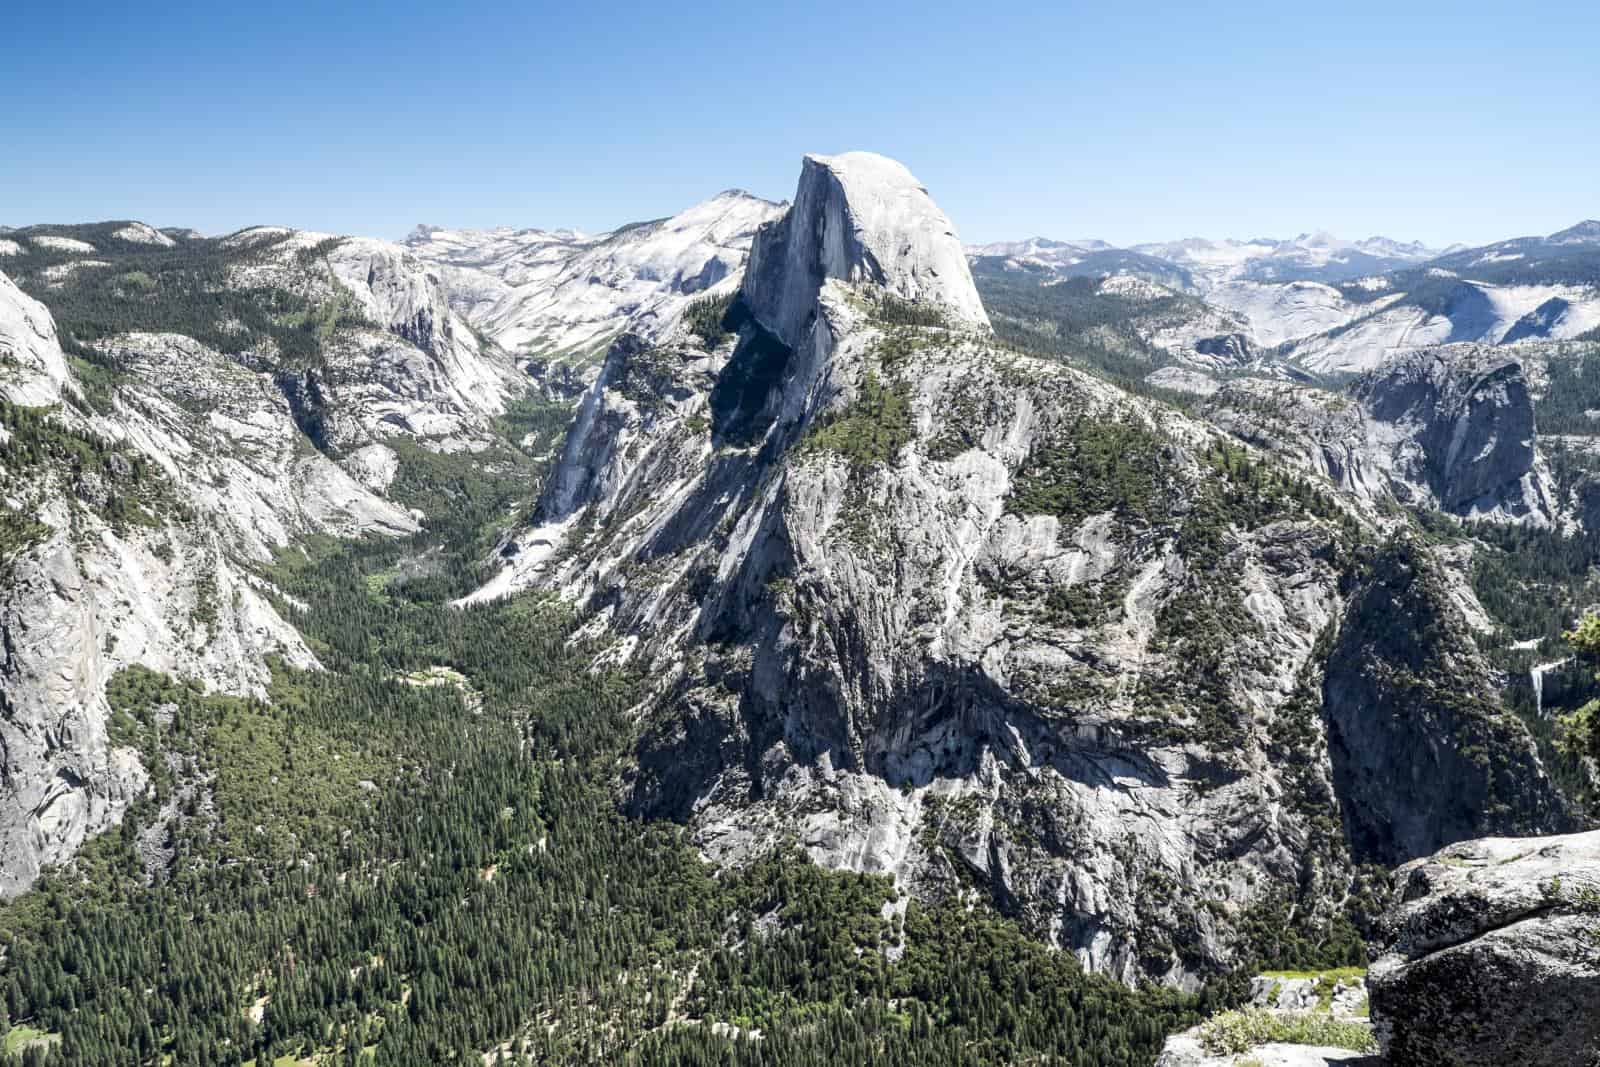 National Parks & Trademark Disputes Continue • 2016 04 08 yosemite podcast